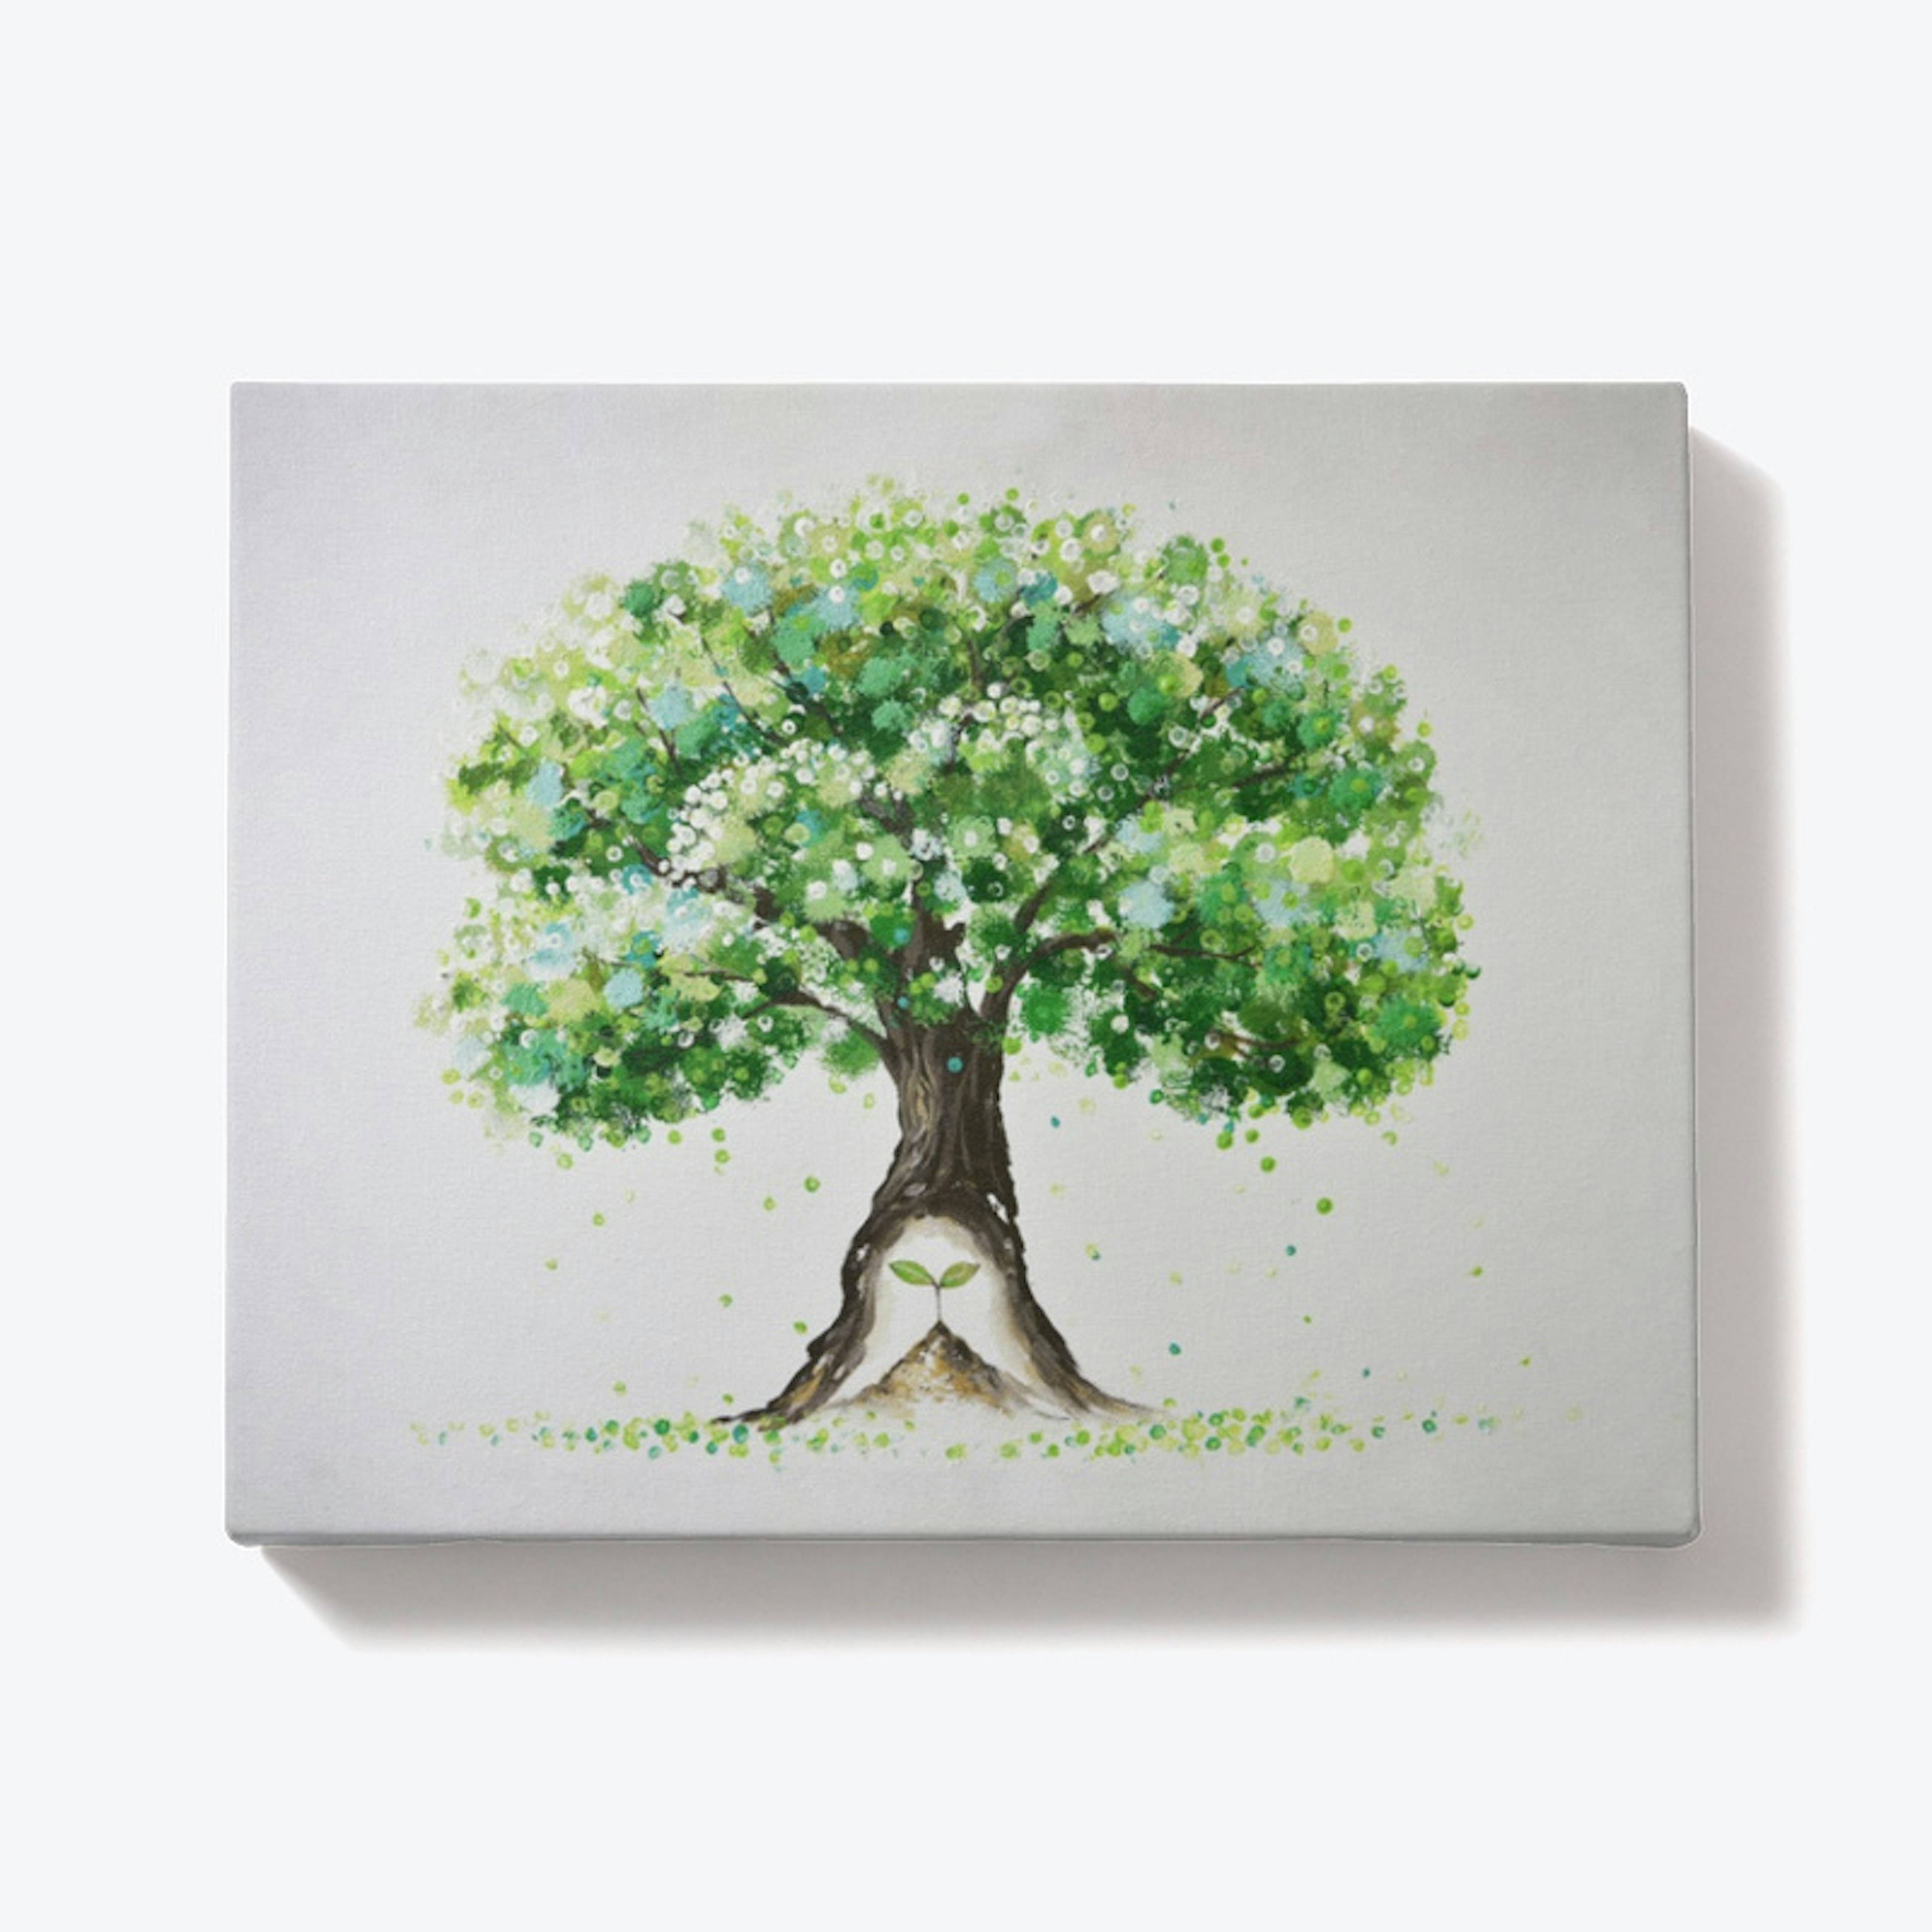 A Growing Tree from Sprout III